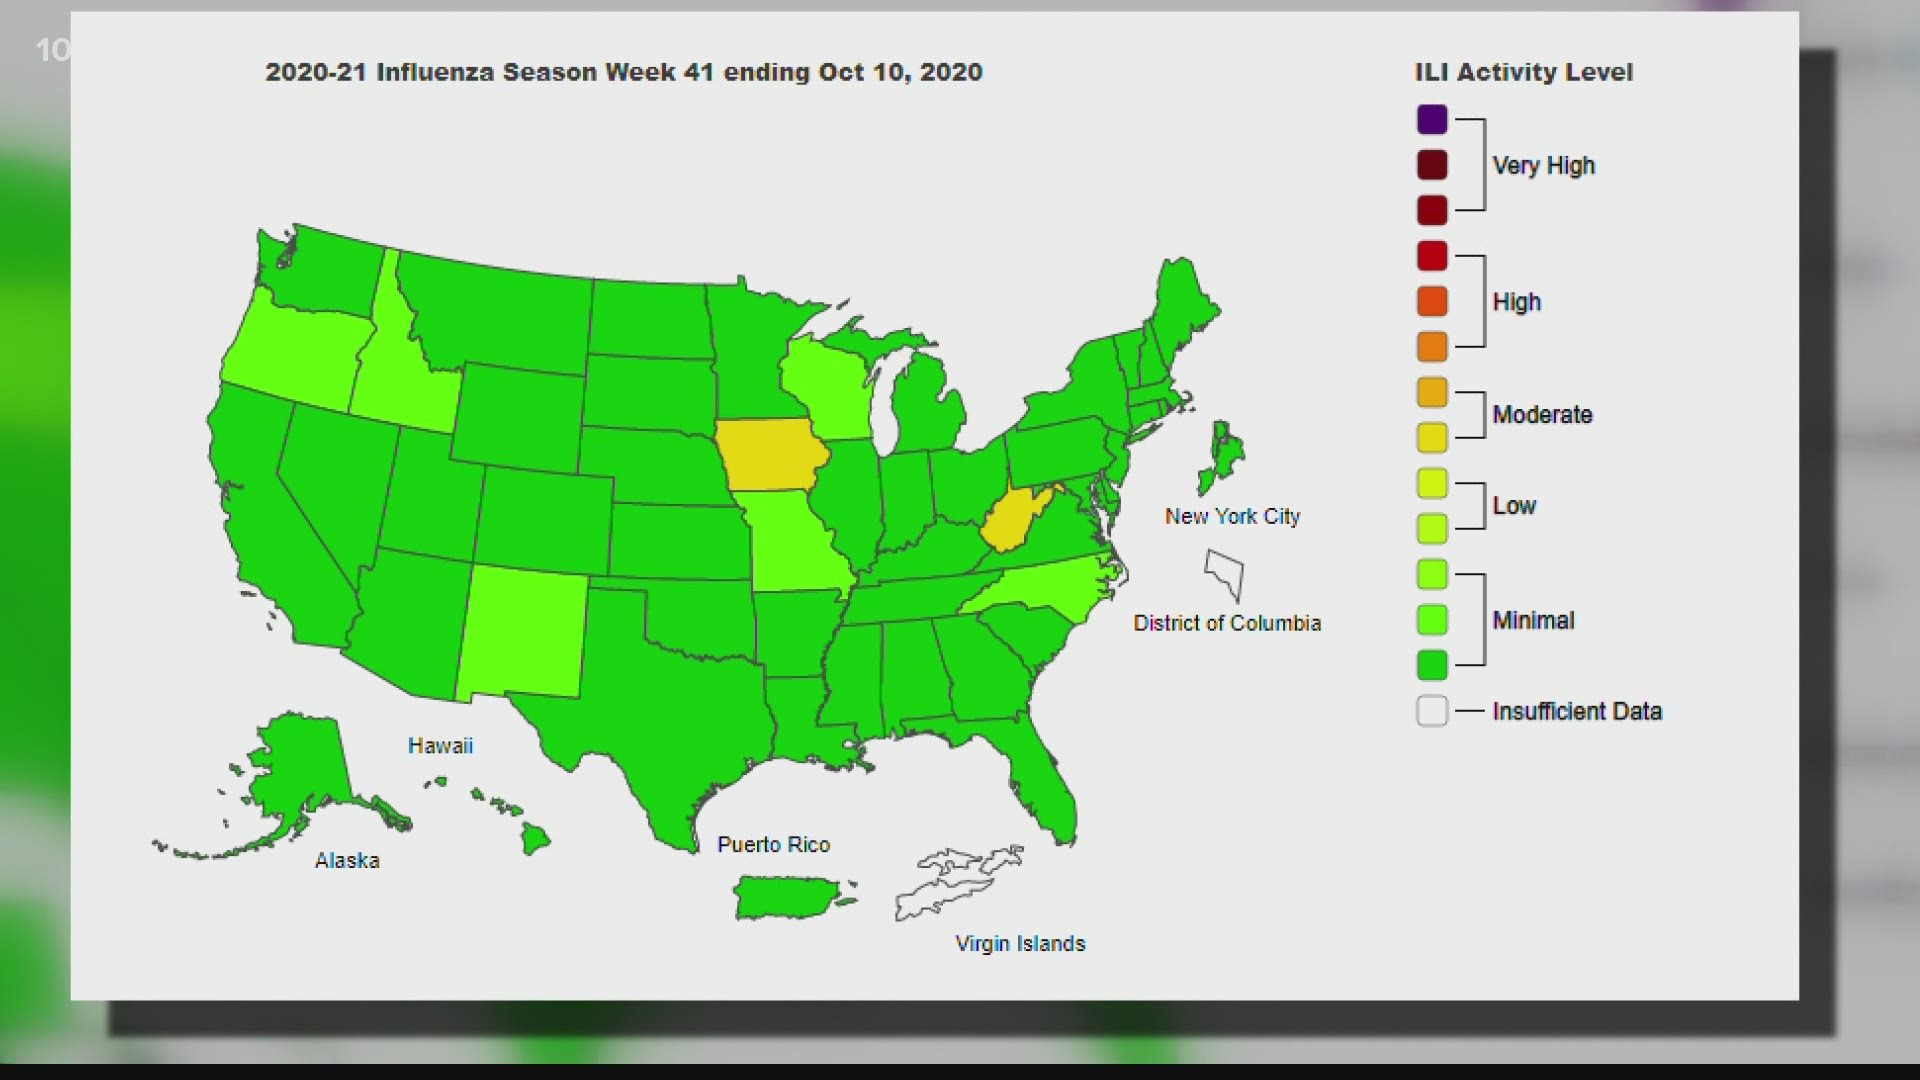 The "Flu View" report for the 2020-2021 flu season shows minimal activity across the country.